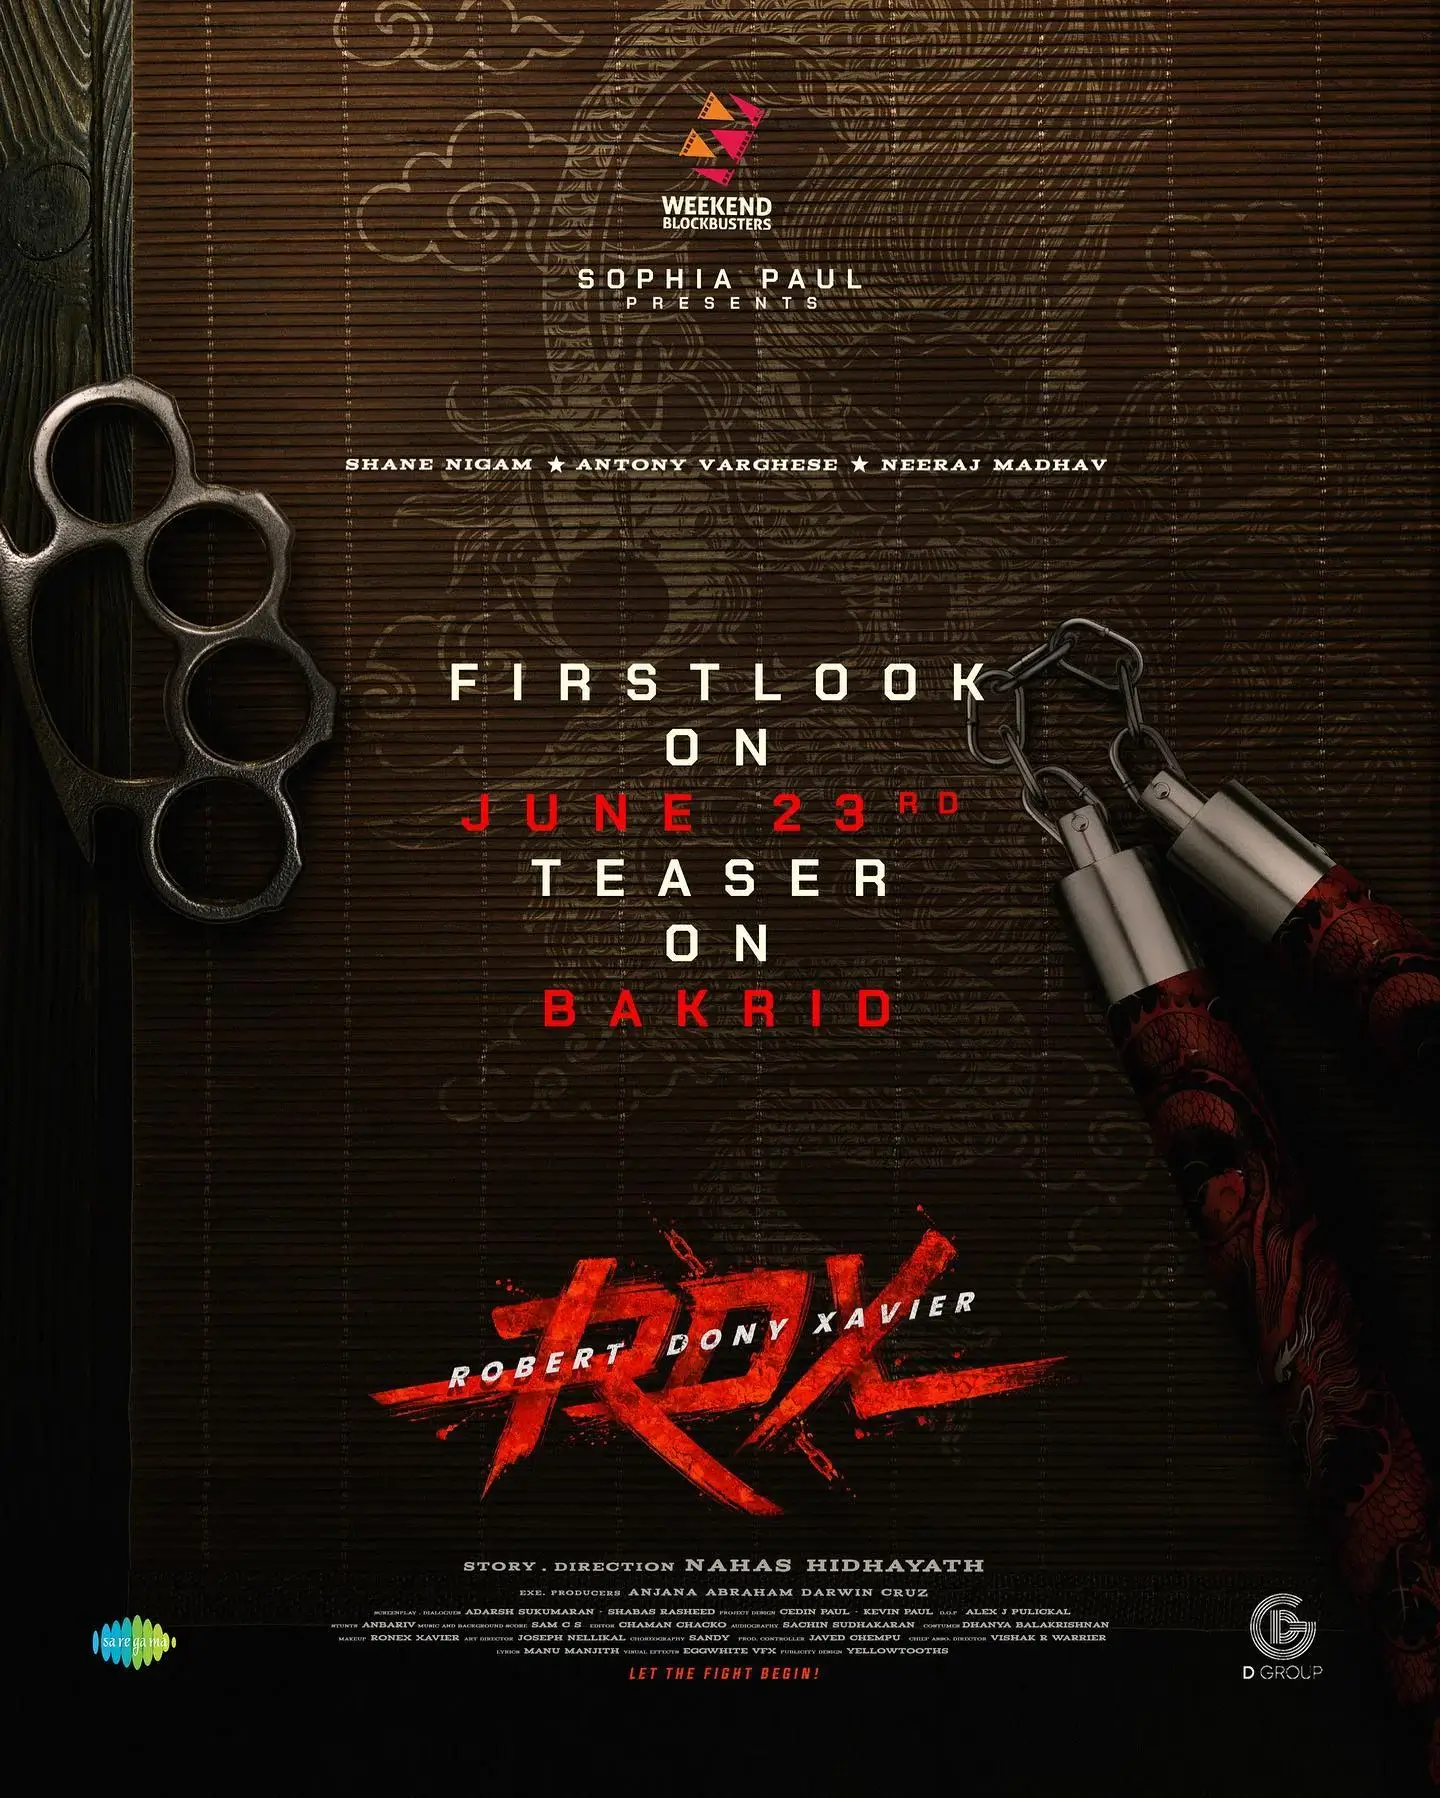 RDX Movie First Look Poster Release Date Revealed Teaser Coming Soon